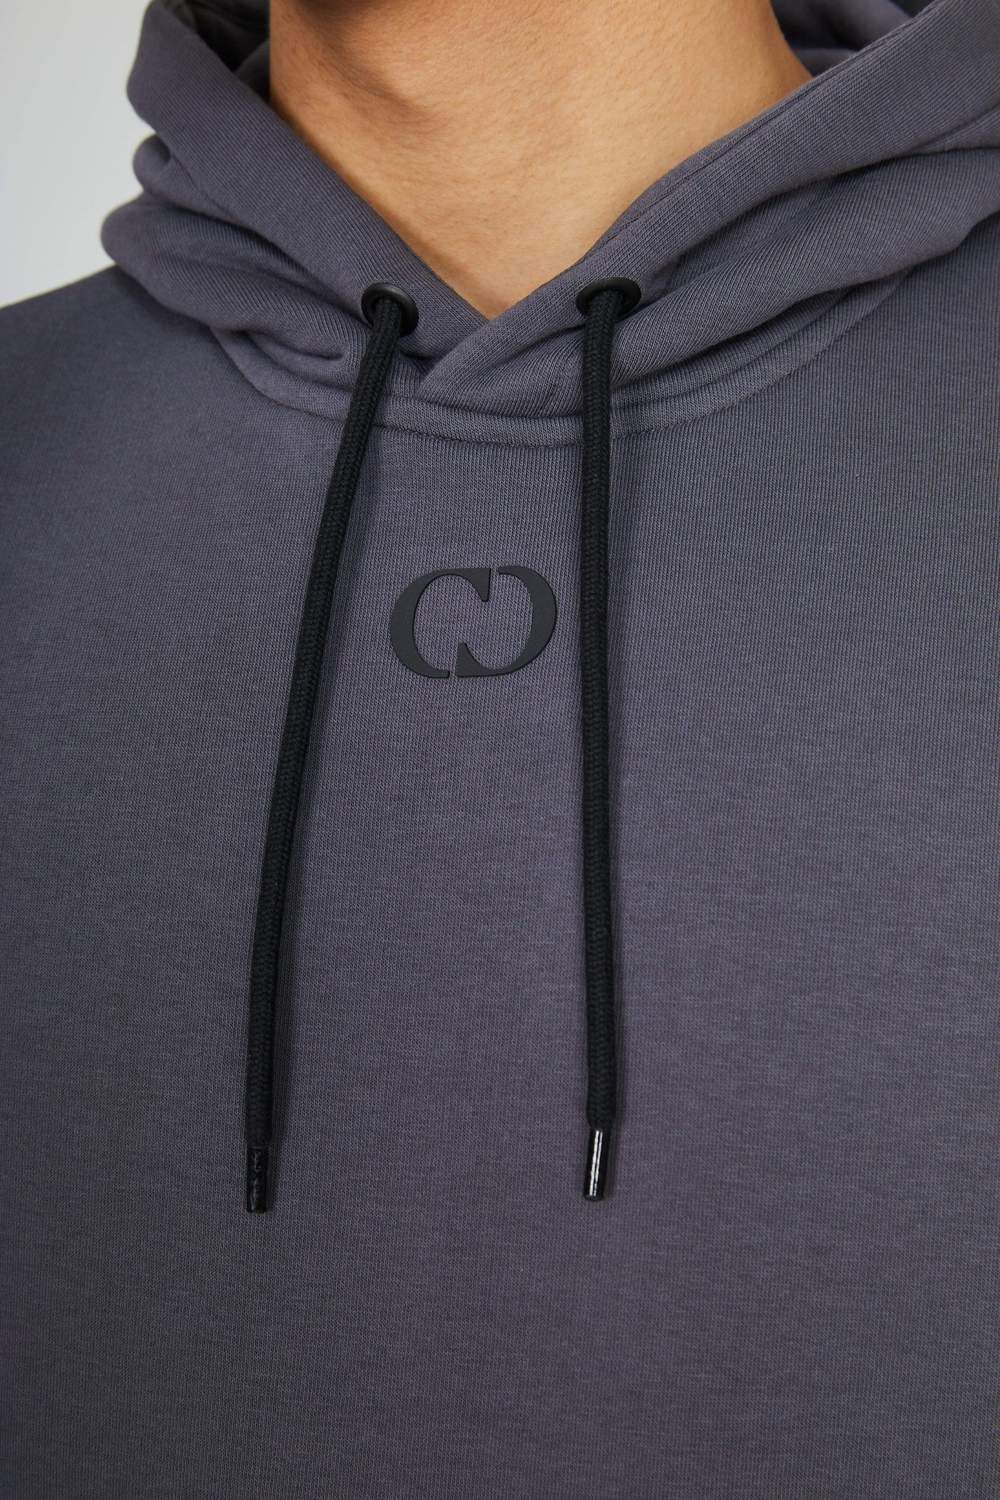 ESSENTIAL HOOD - CHARCOAL - 80% COTTON, 20% POLYESTER